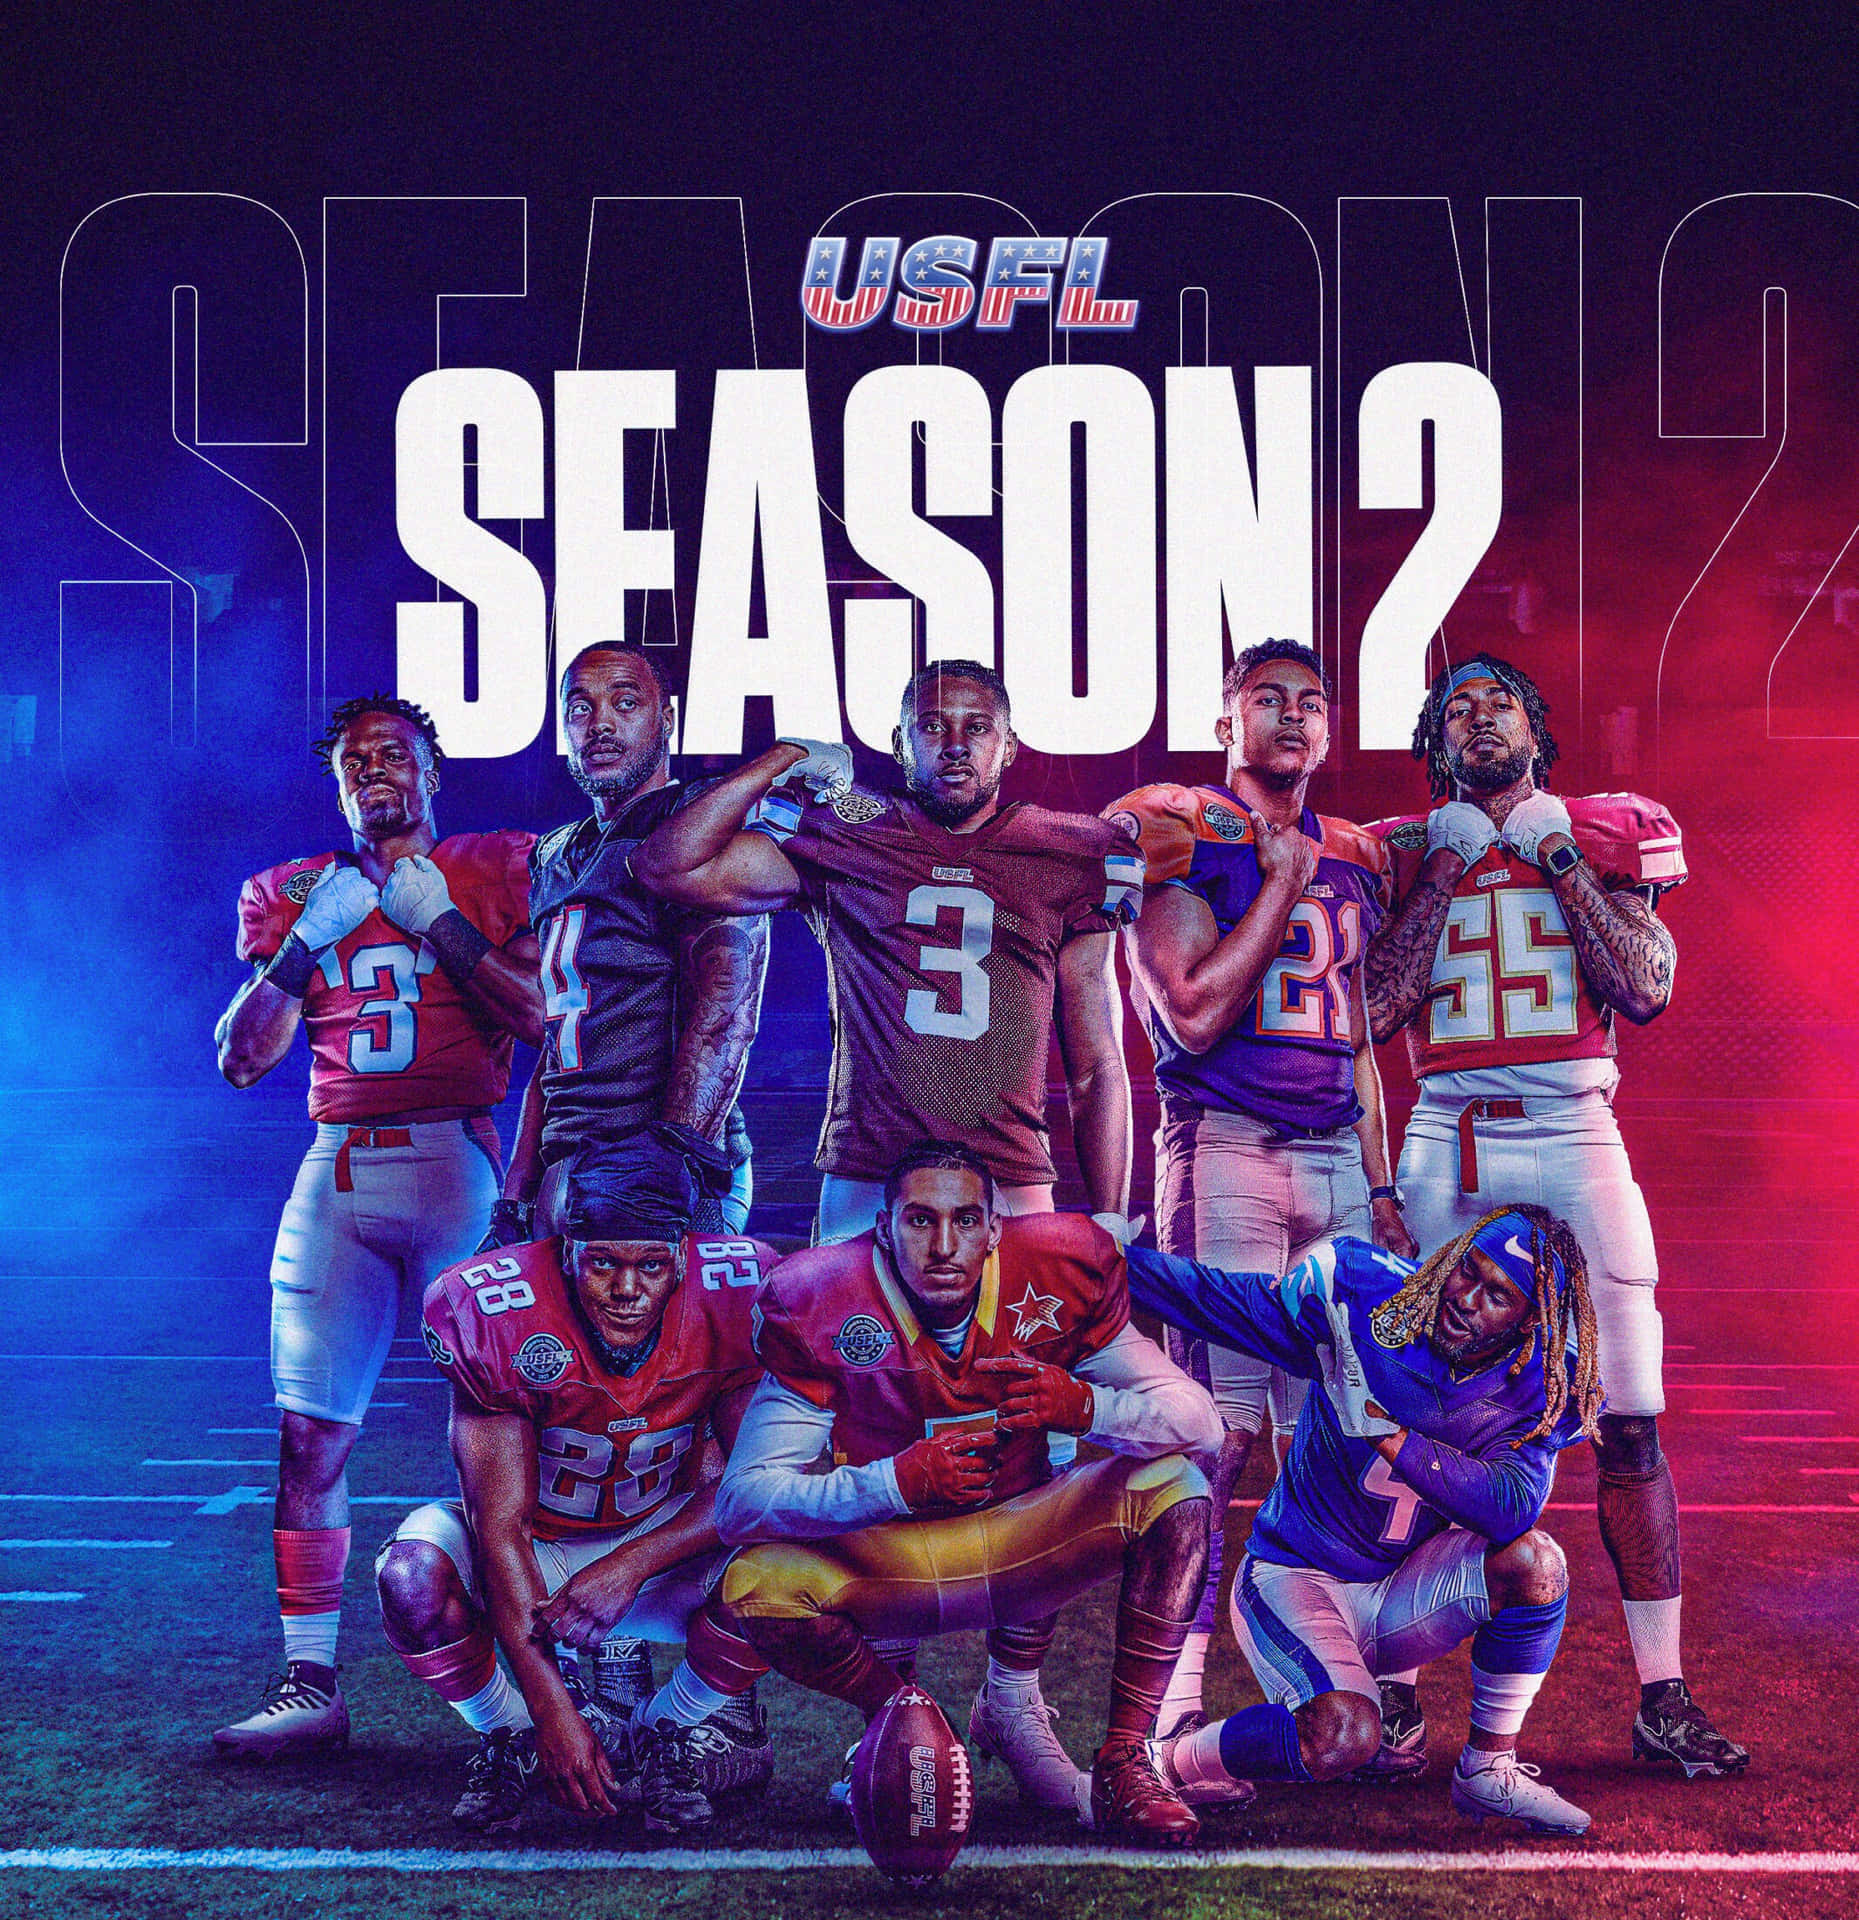 Enjoy the exciting style of football with the United States Football League. Wallpaper